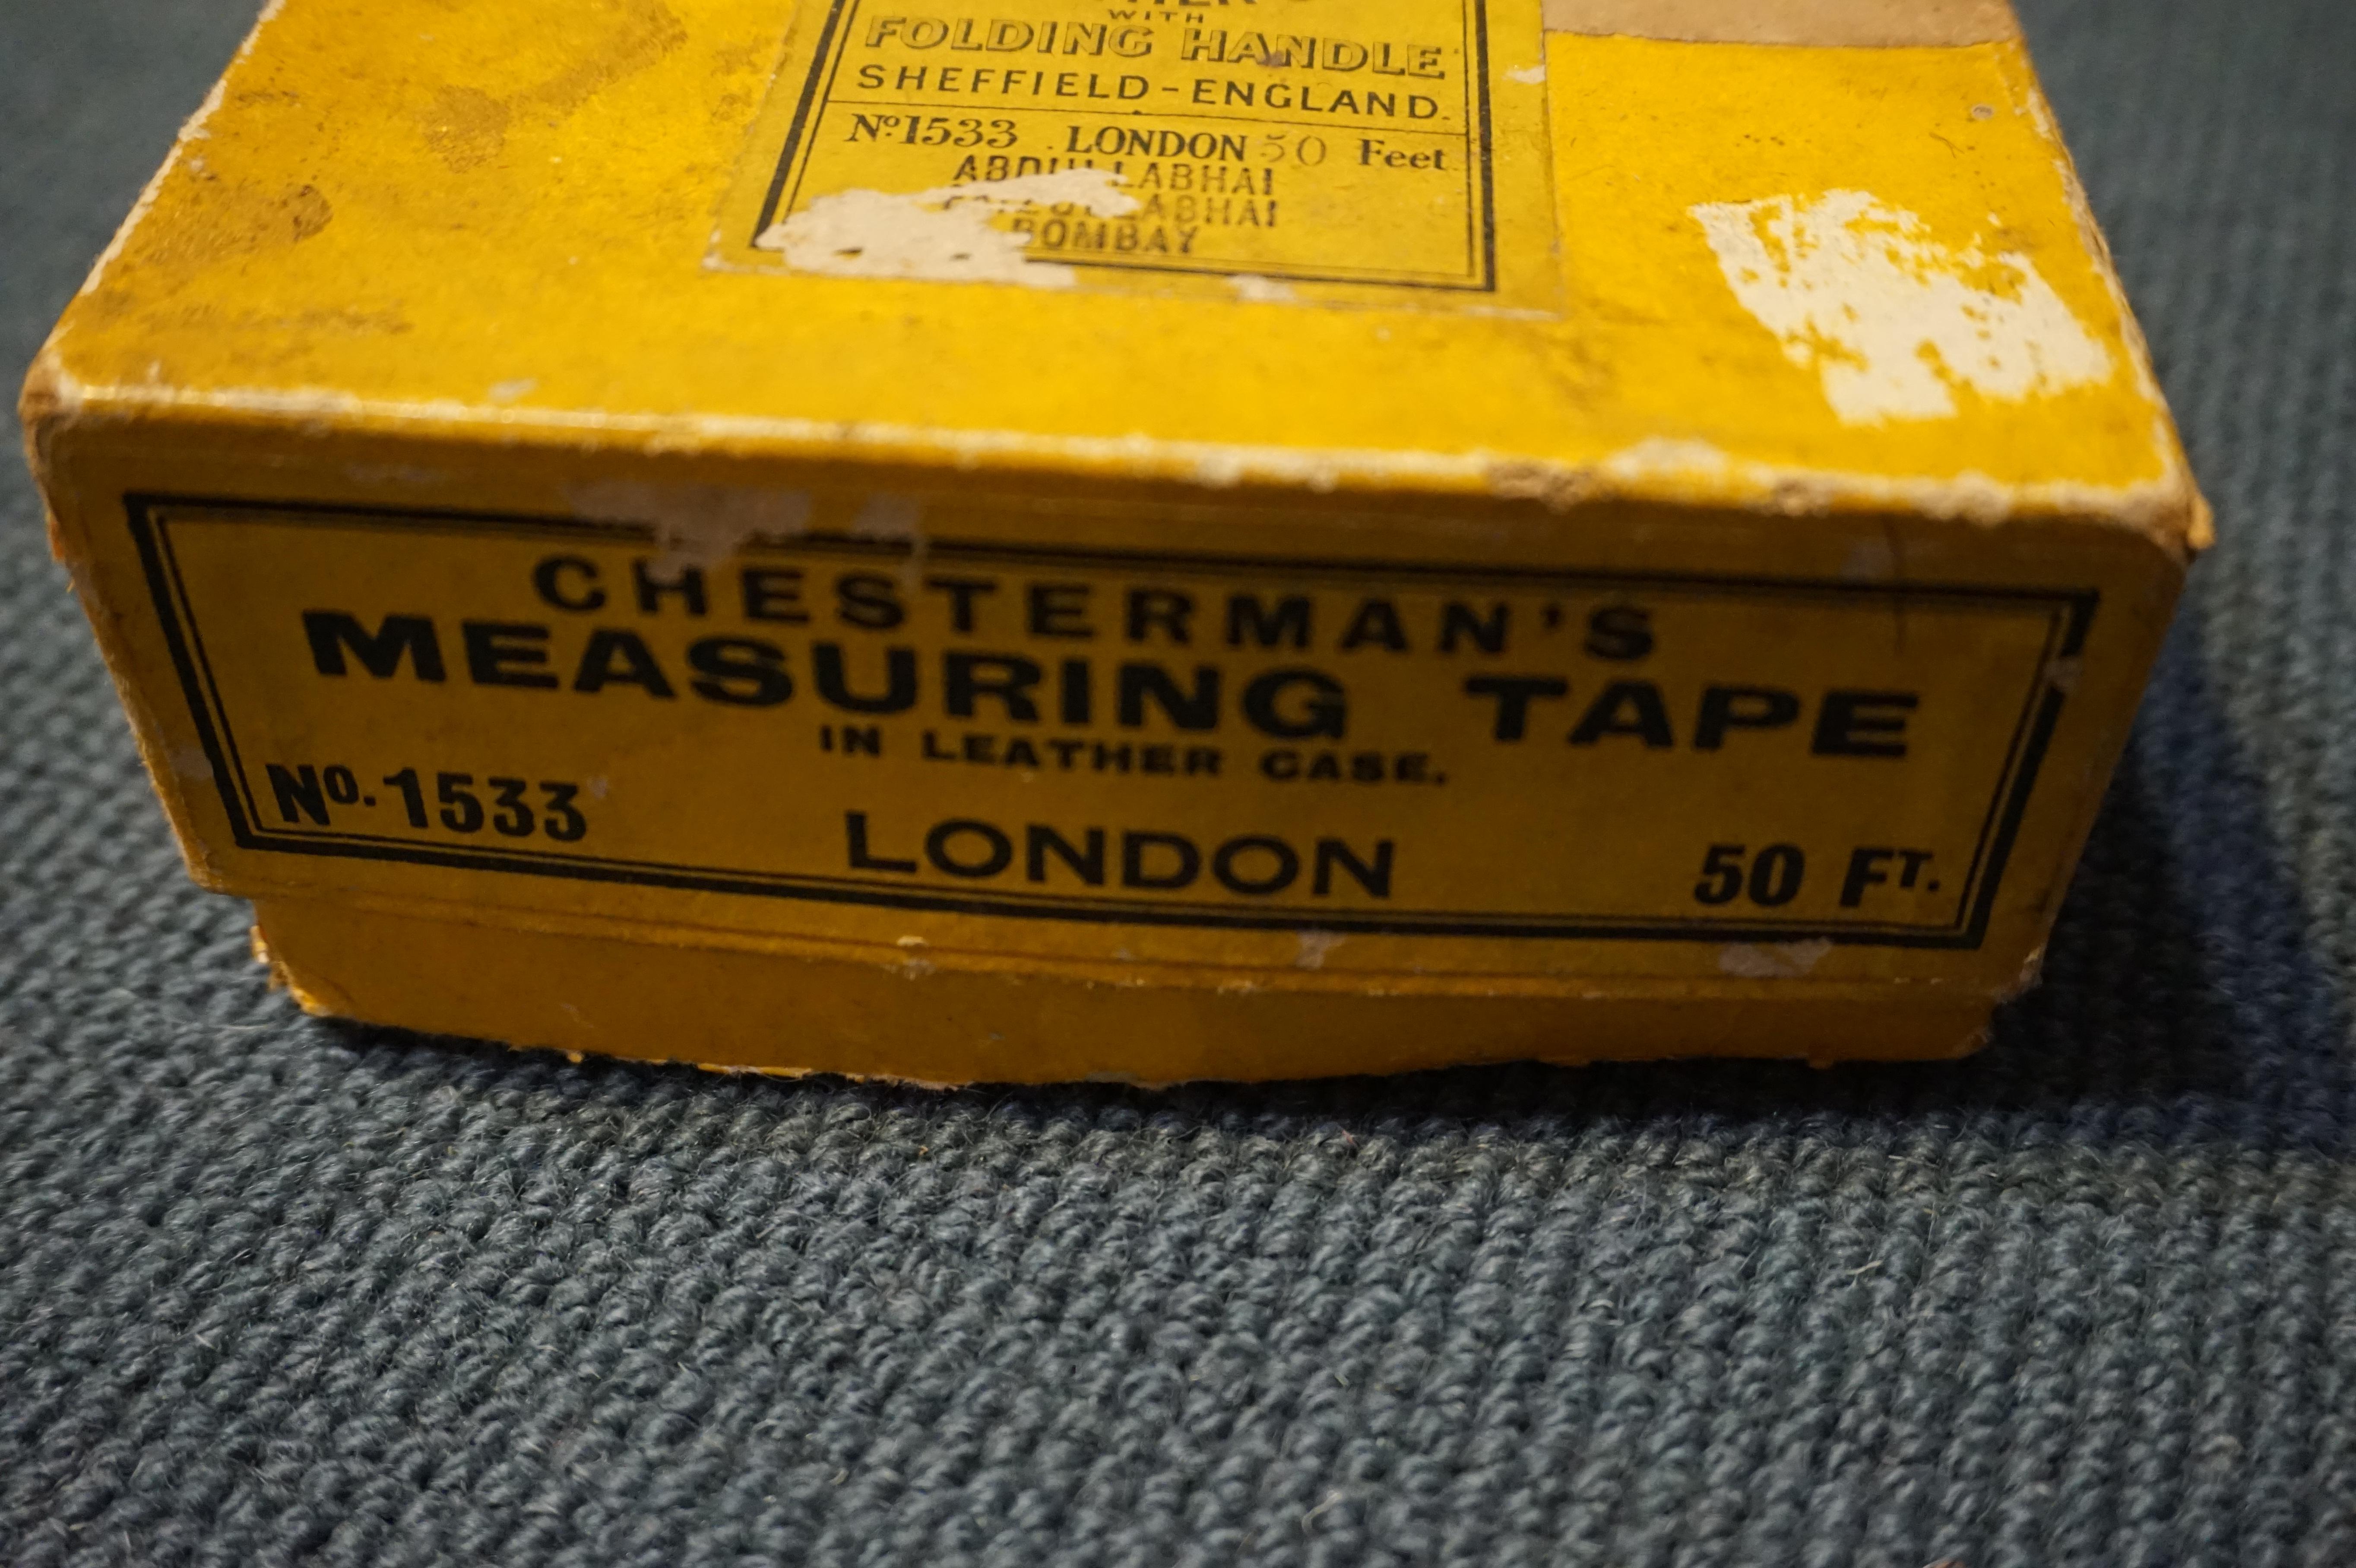 Hand-Crafted Colonial Chesterman's Leather Case Measuring Tape London in Original Box